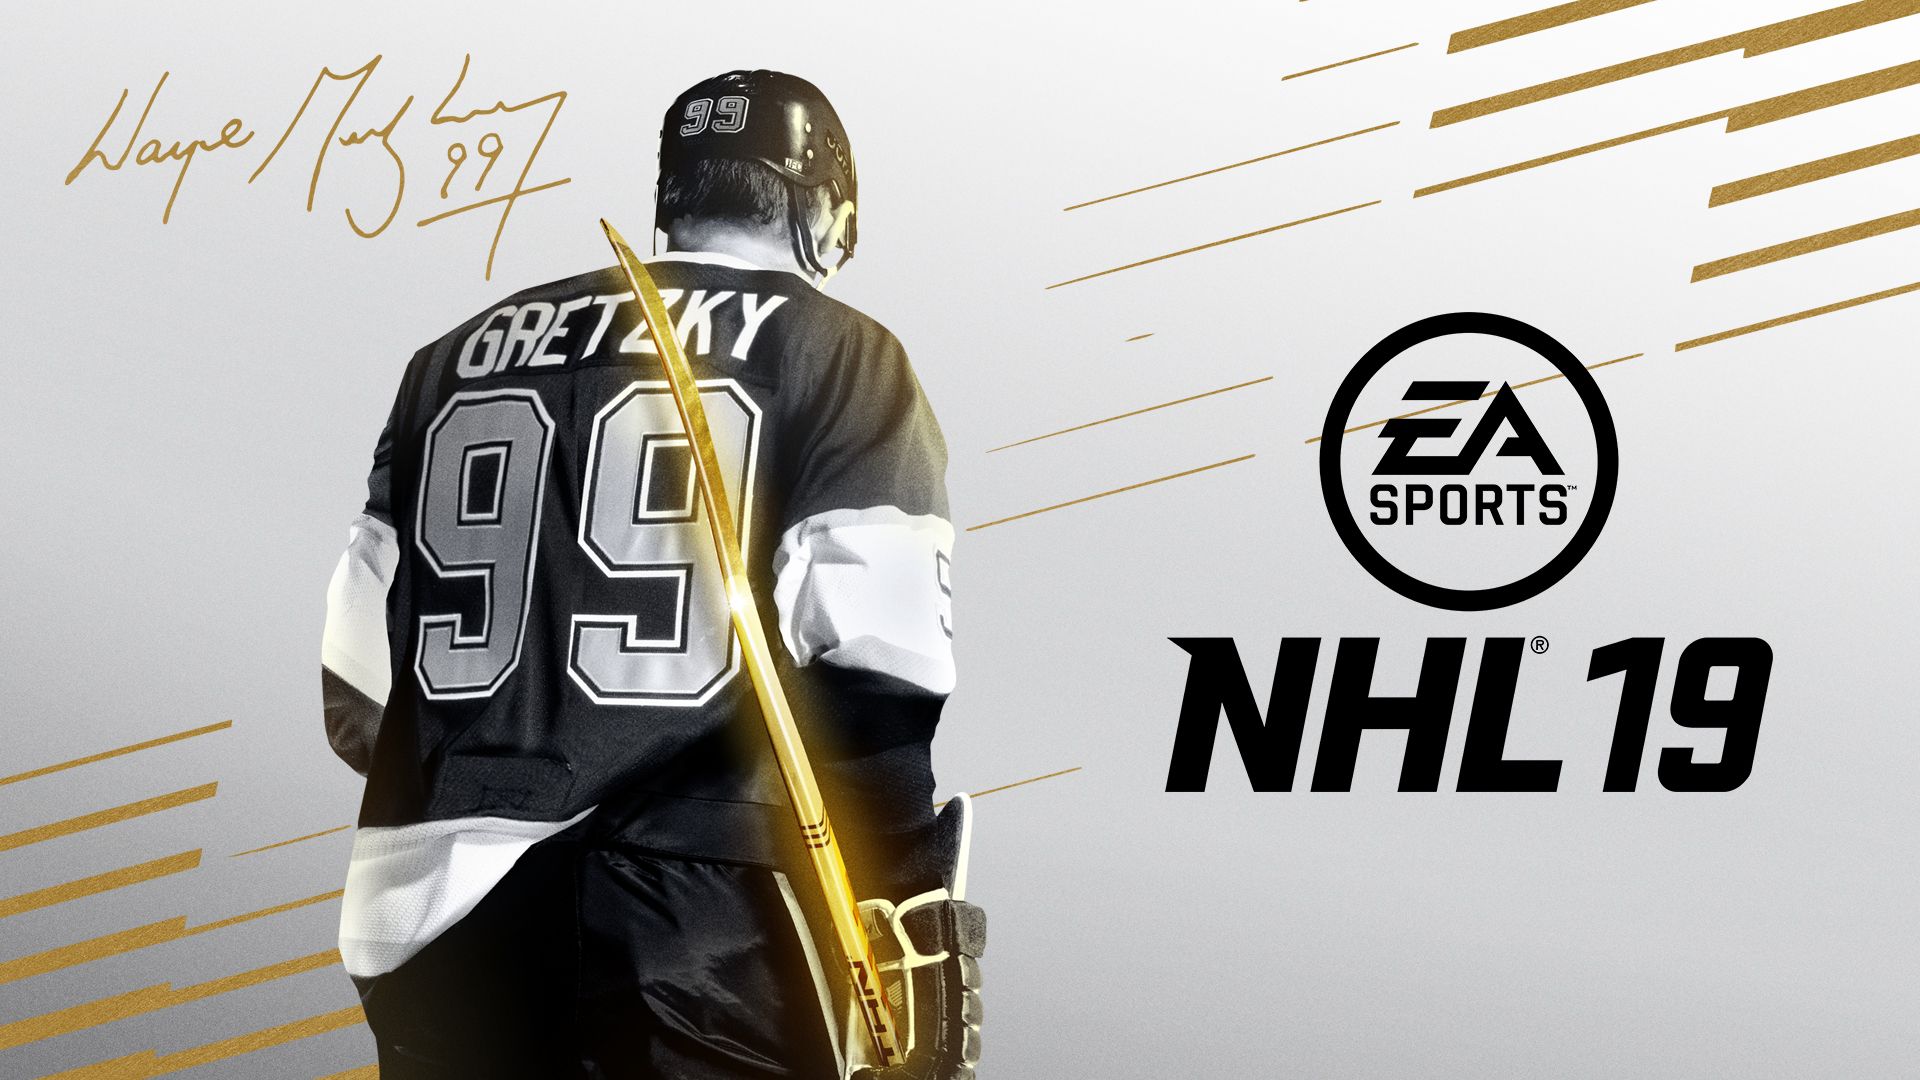 Nhl 19 Swedish Cover Athlete - Ea Sports , HD Wallpaper & Backgrounds